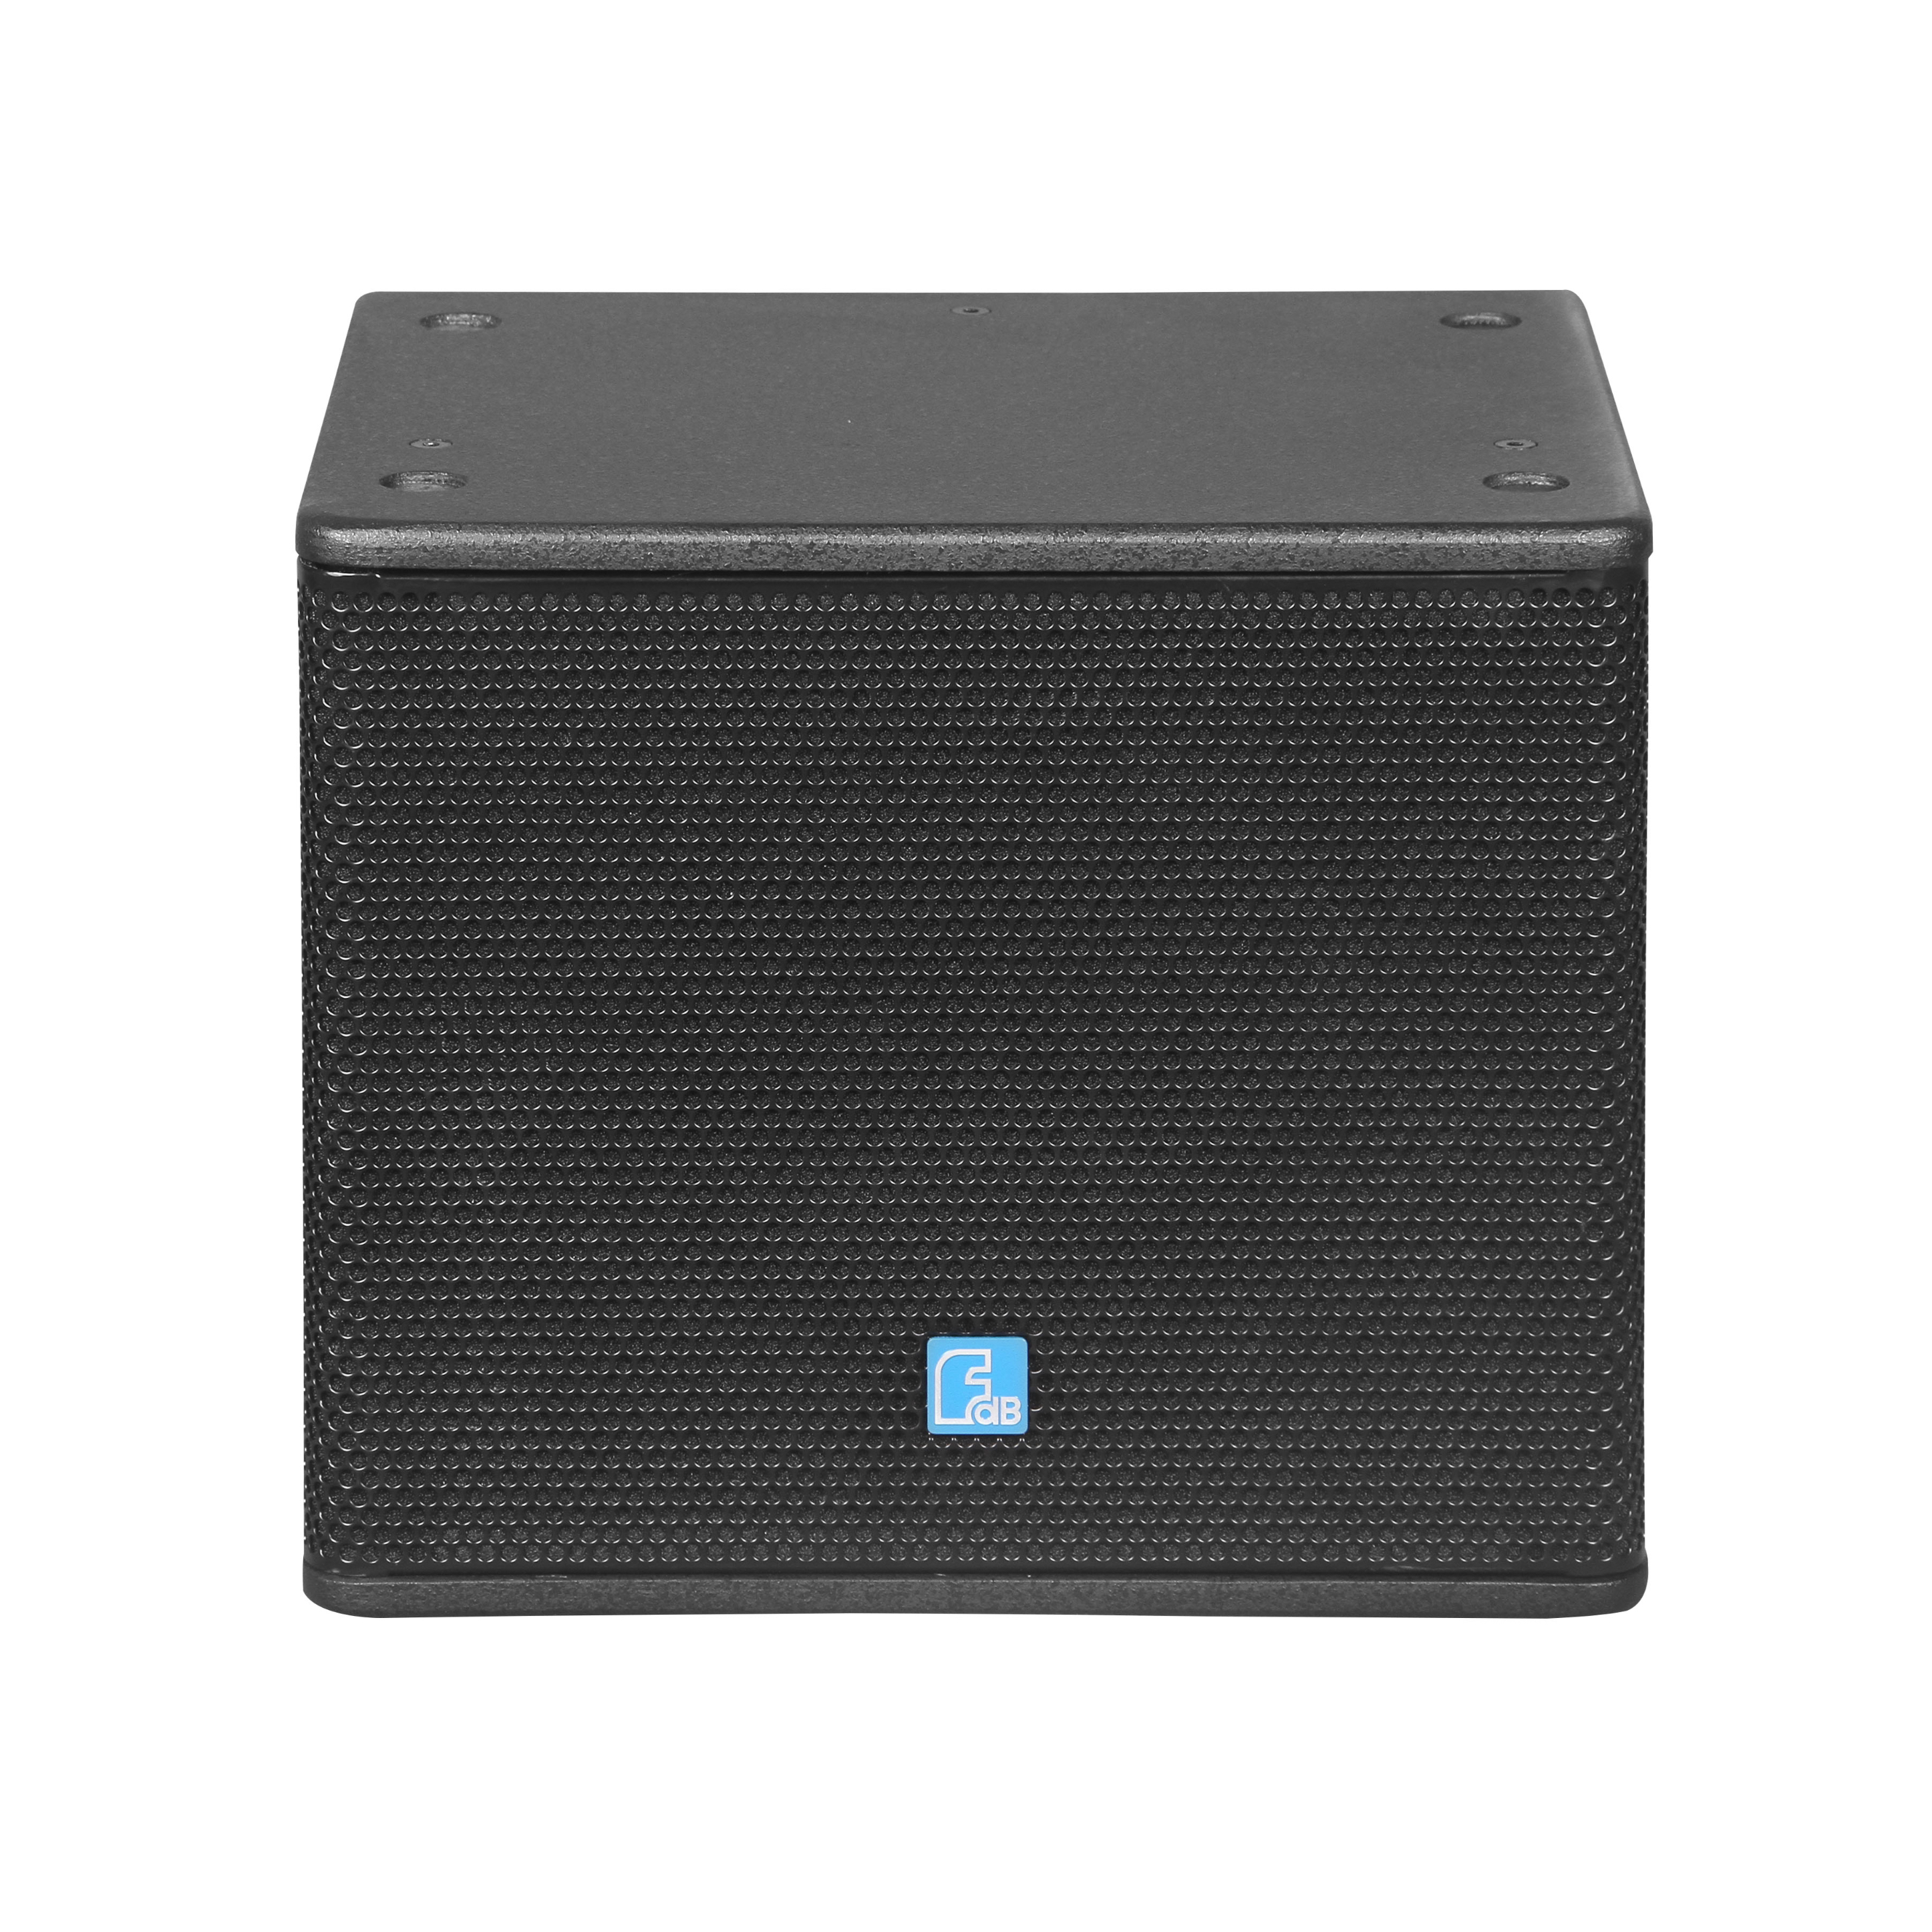 ES110 1x10 inch subwoofer for sub-bass reinforcement